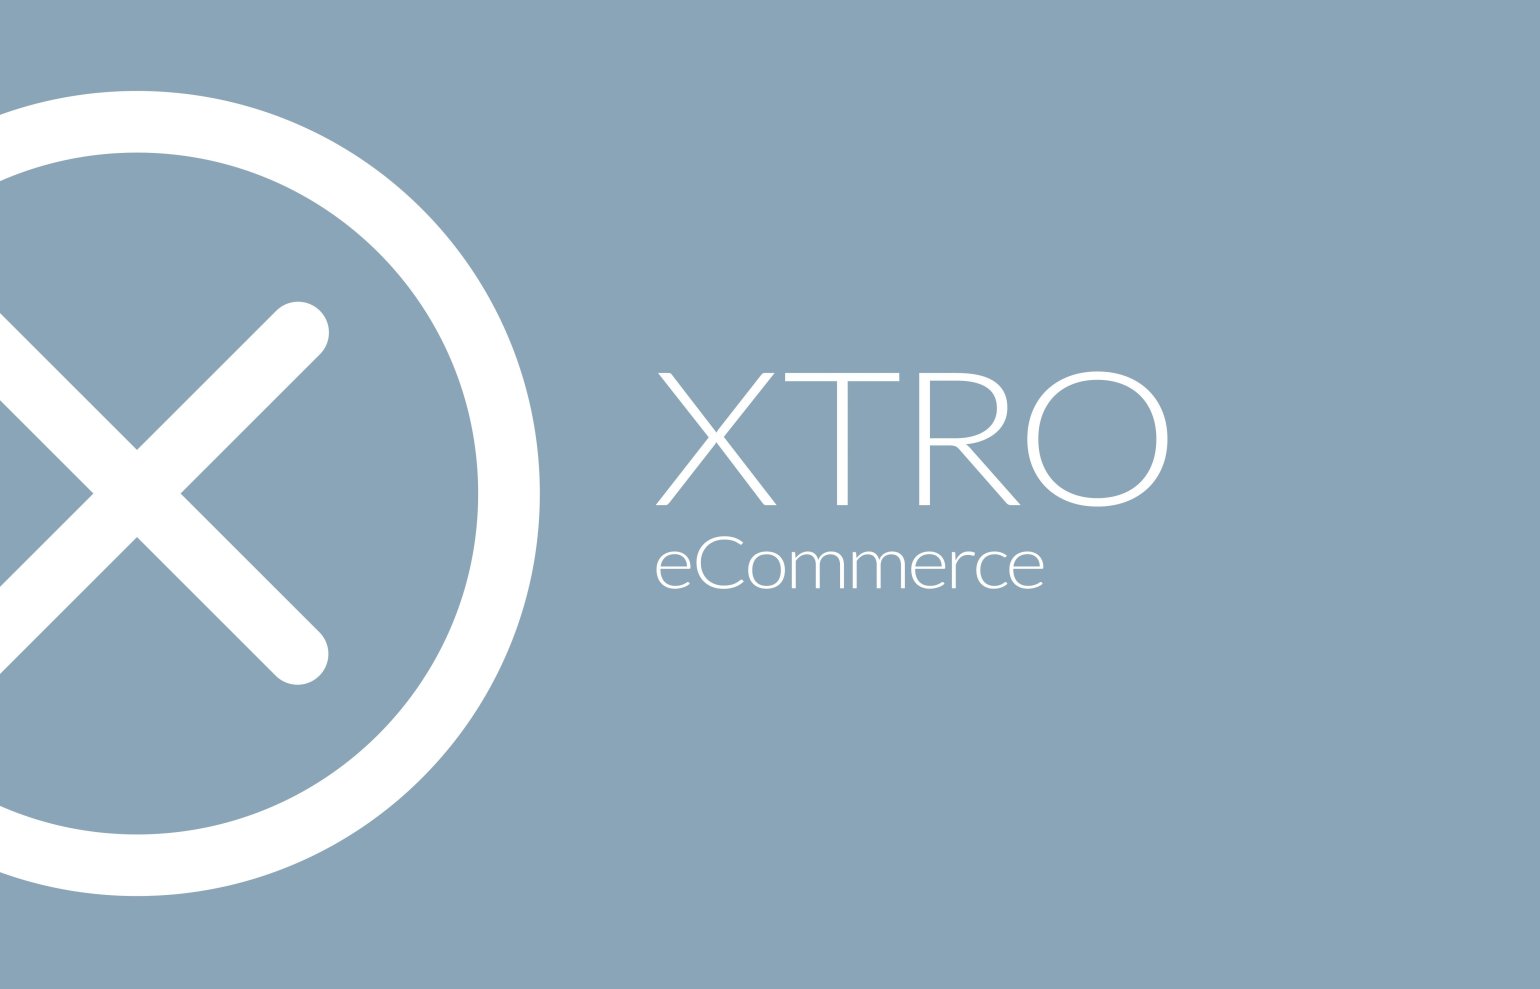 Enterprise level eCommerce, tailored for each client by our team of dedicated developers. XTRO eCommerce features a comprehensive suite of leading edge features, including personalisation and intelligent merchandising to drive performance and deliver higher levels of user engagement and conversions.
